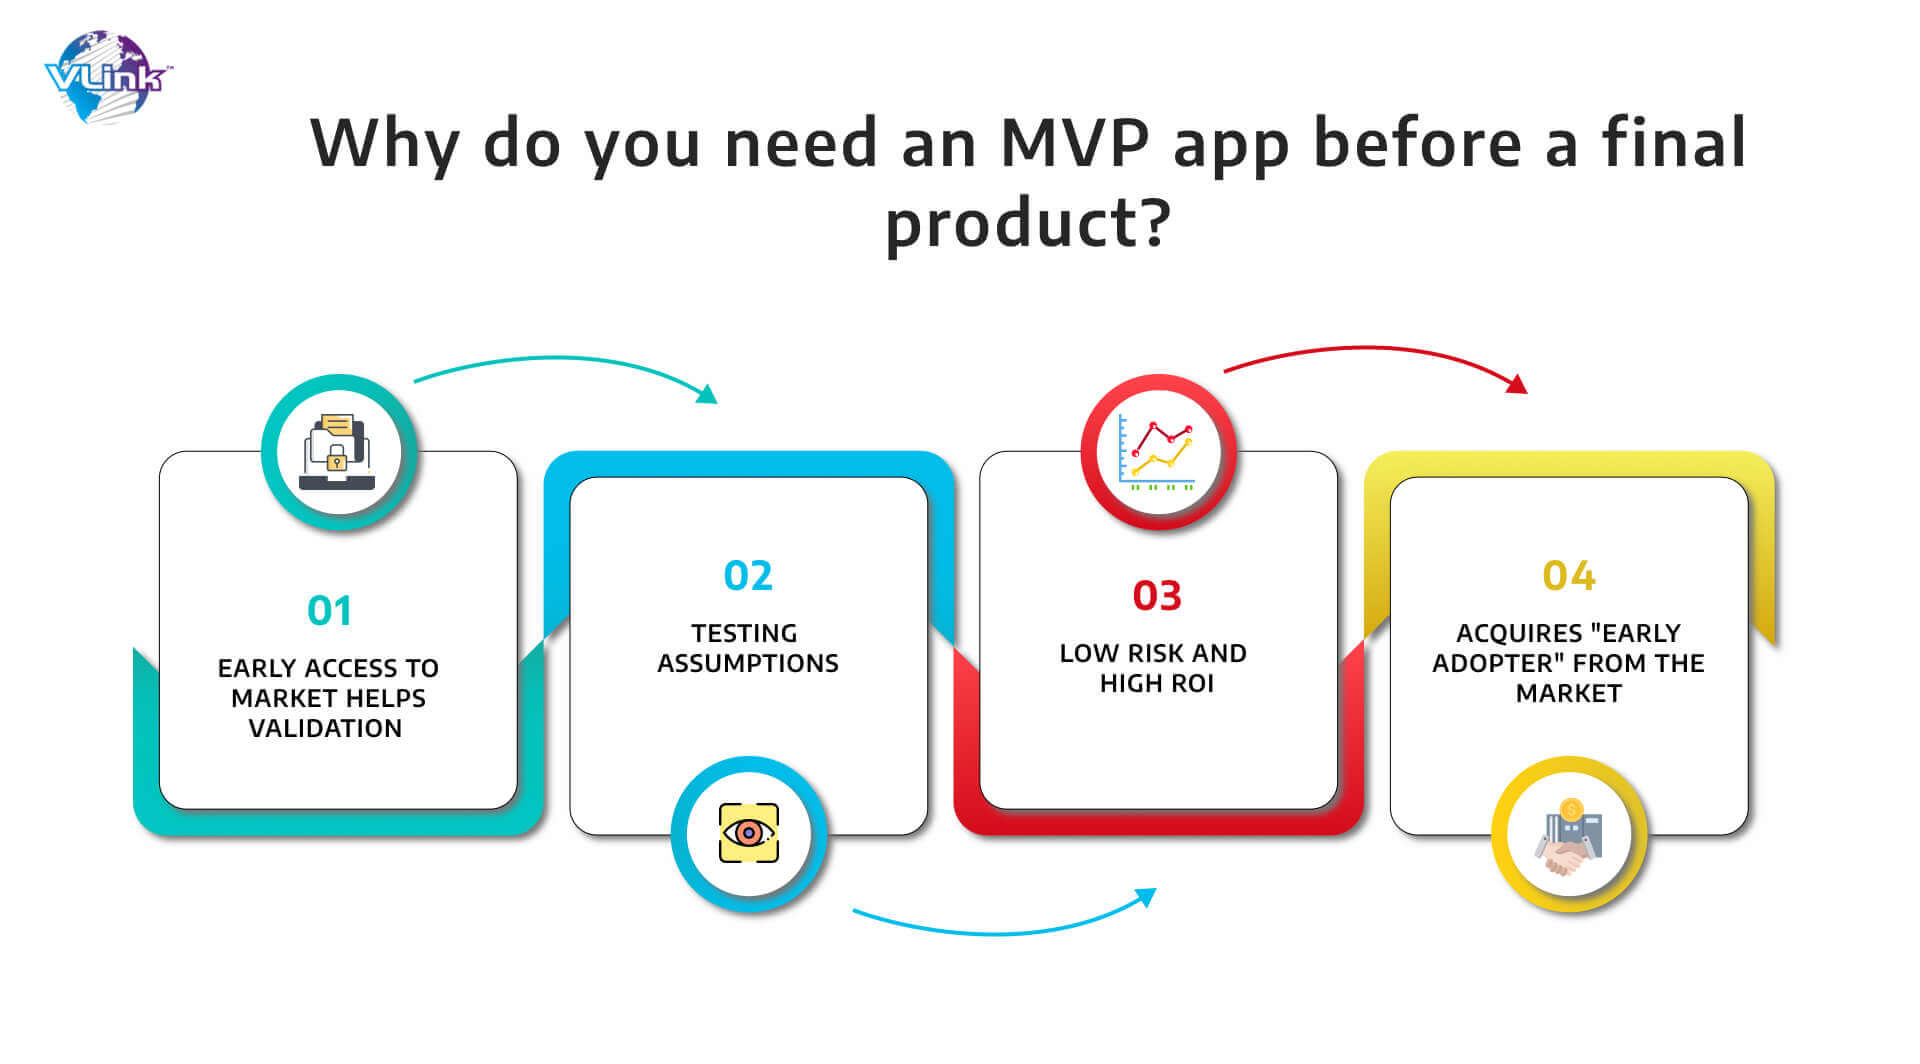 Why do you need an MVP app before a final product